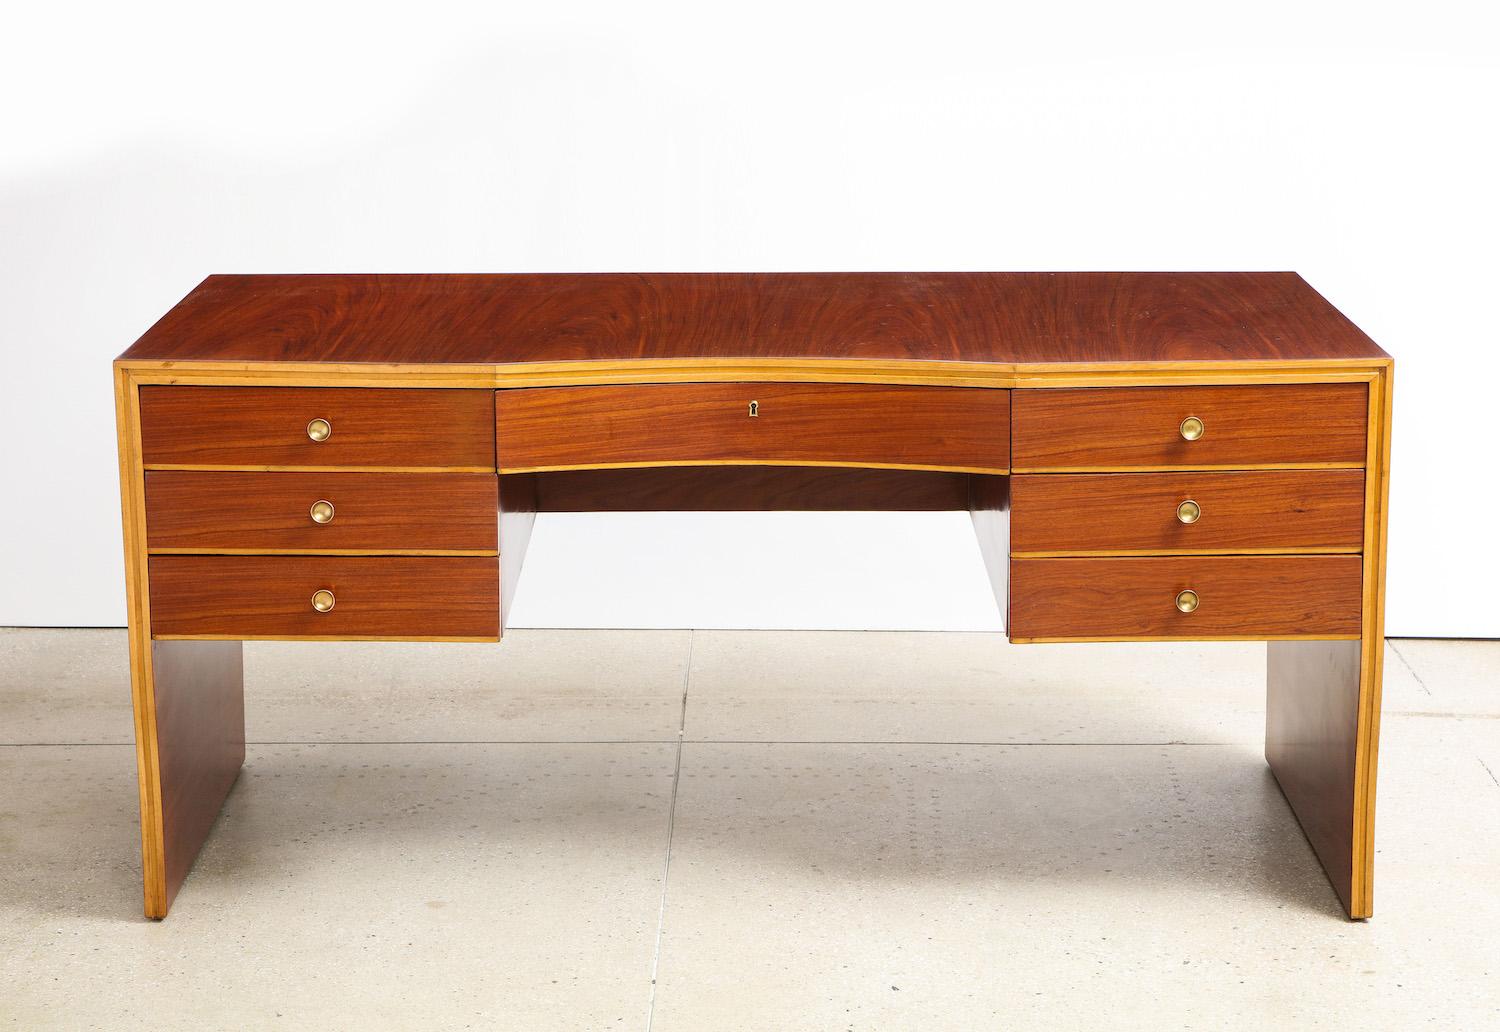 7-drawer desk by Osvaldo Borsani for ABV. Rosewood, maple, brass. Curved desk finished on both sides. A variant of an earlier model that originally covered in parchment and designed for Casa Caminada, 1938. Wood has been refinished.
Published: